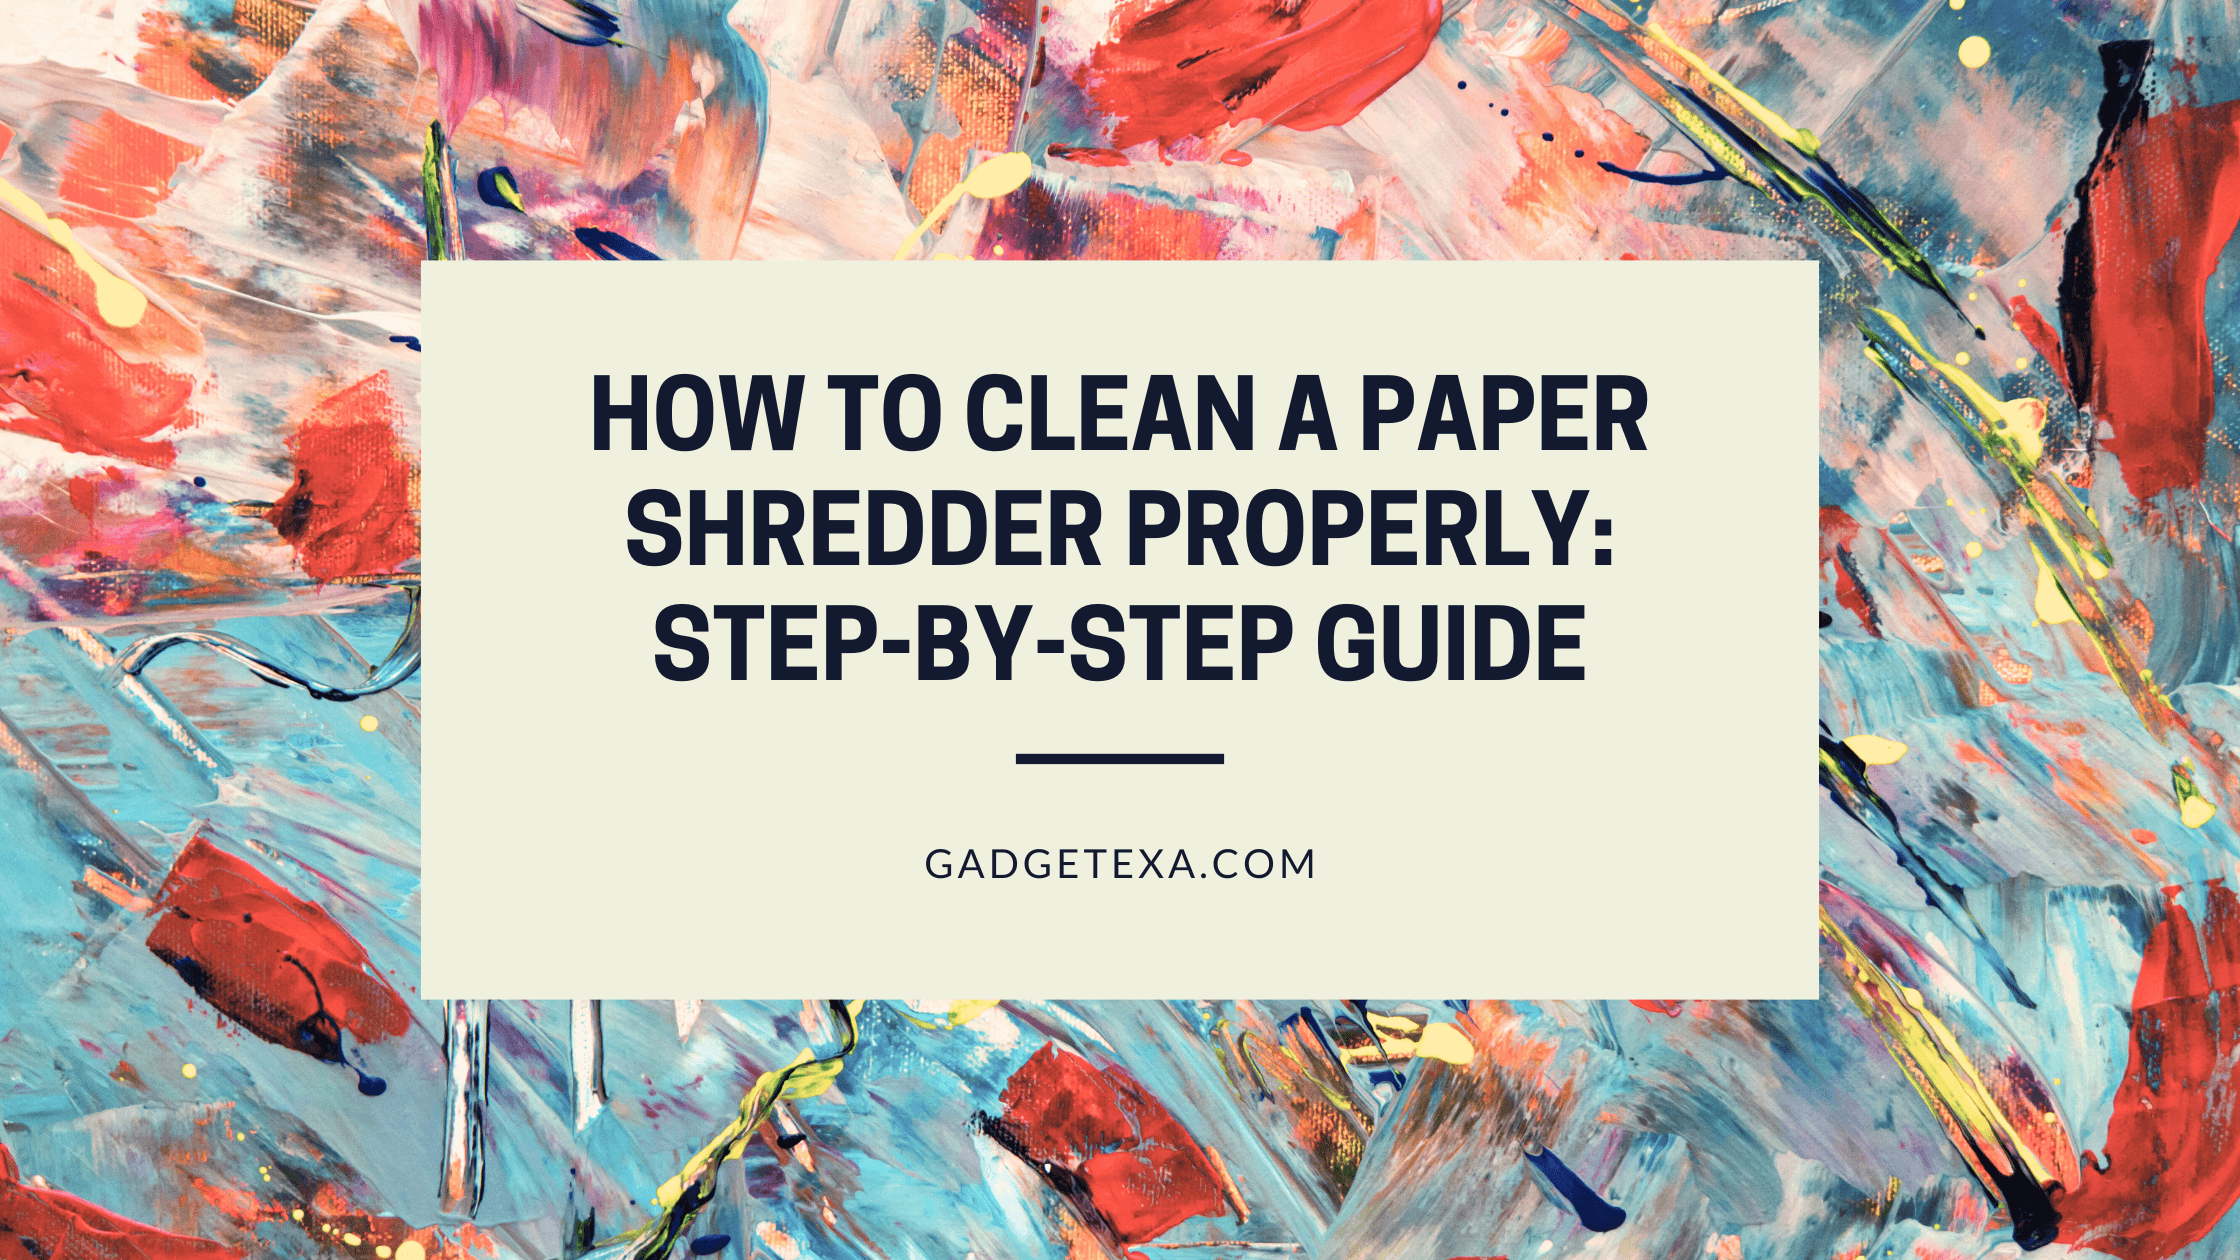 You are currently viewing How to Clean a Paper Shredder Properly: Step-by-Step Guide